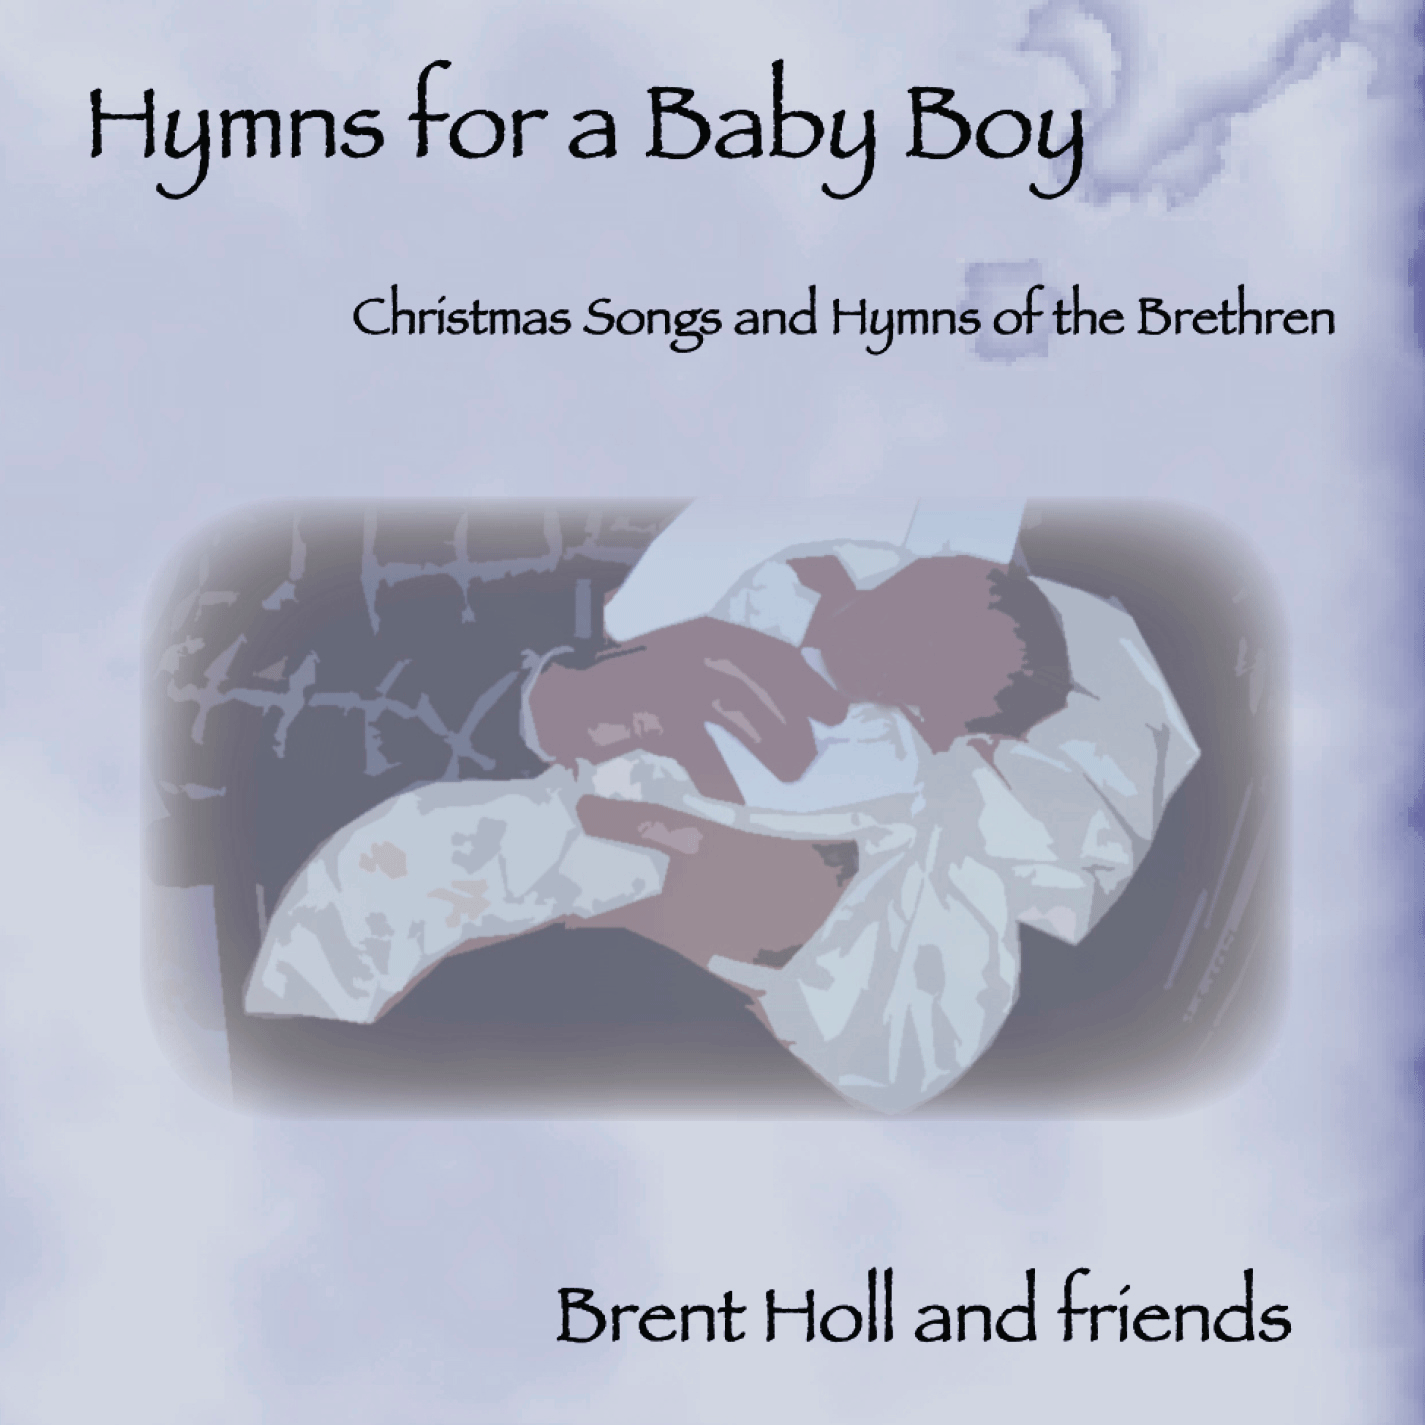 Hymns for a Baby Boy by Brent Holl